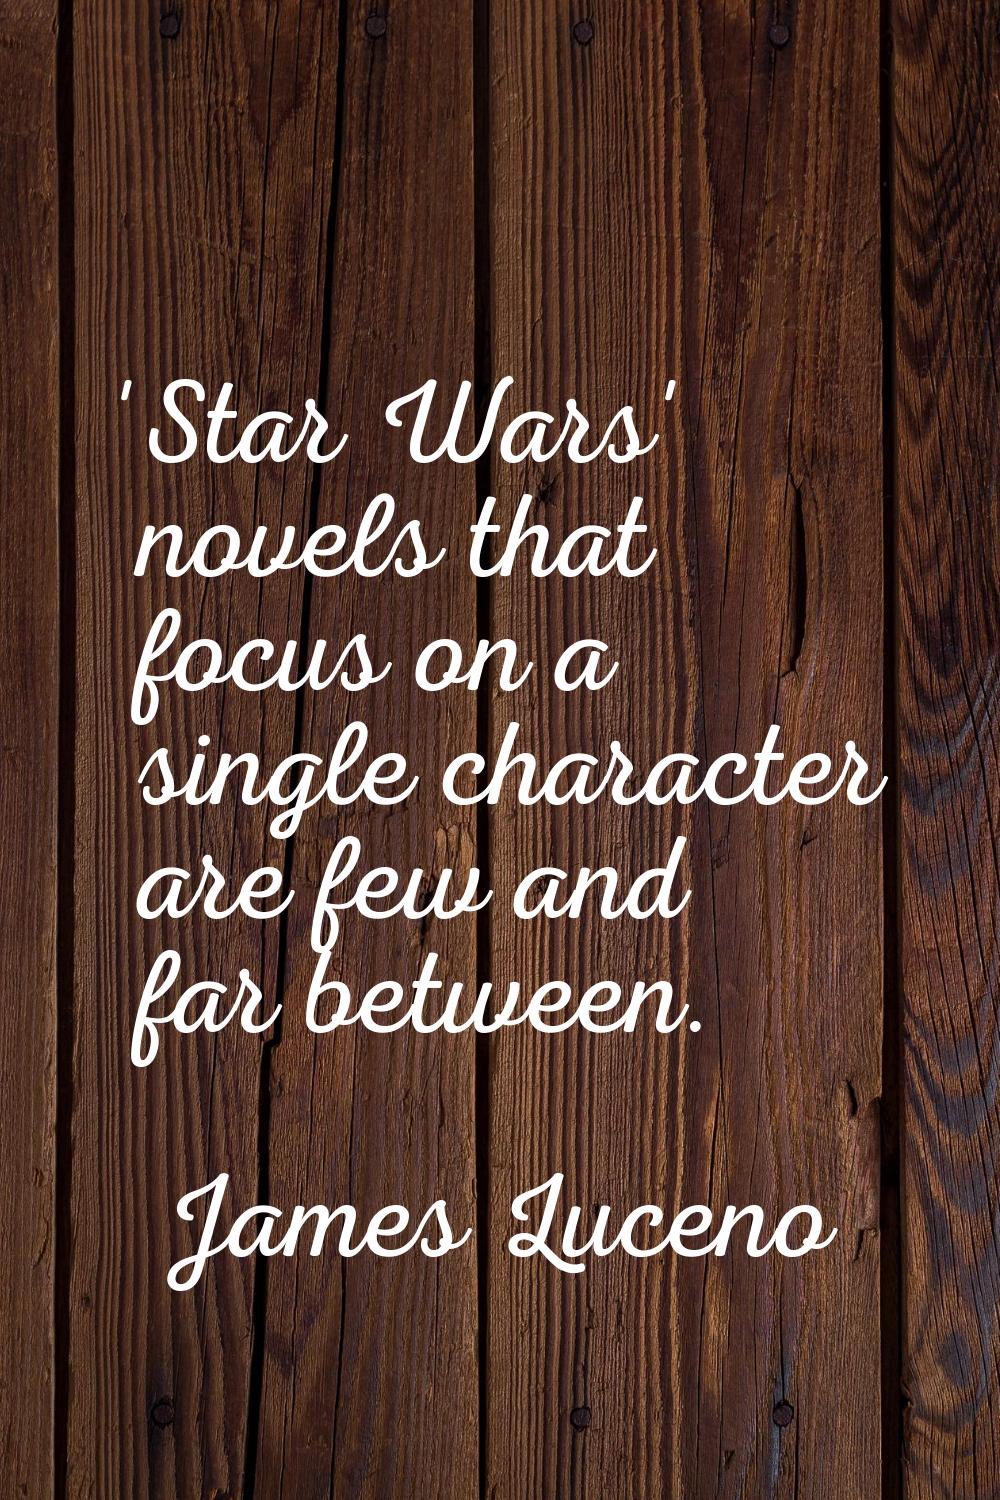 'Star Wars' novels that focus on a single character are few and far between.